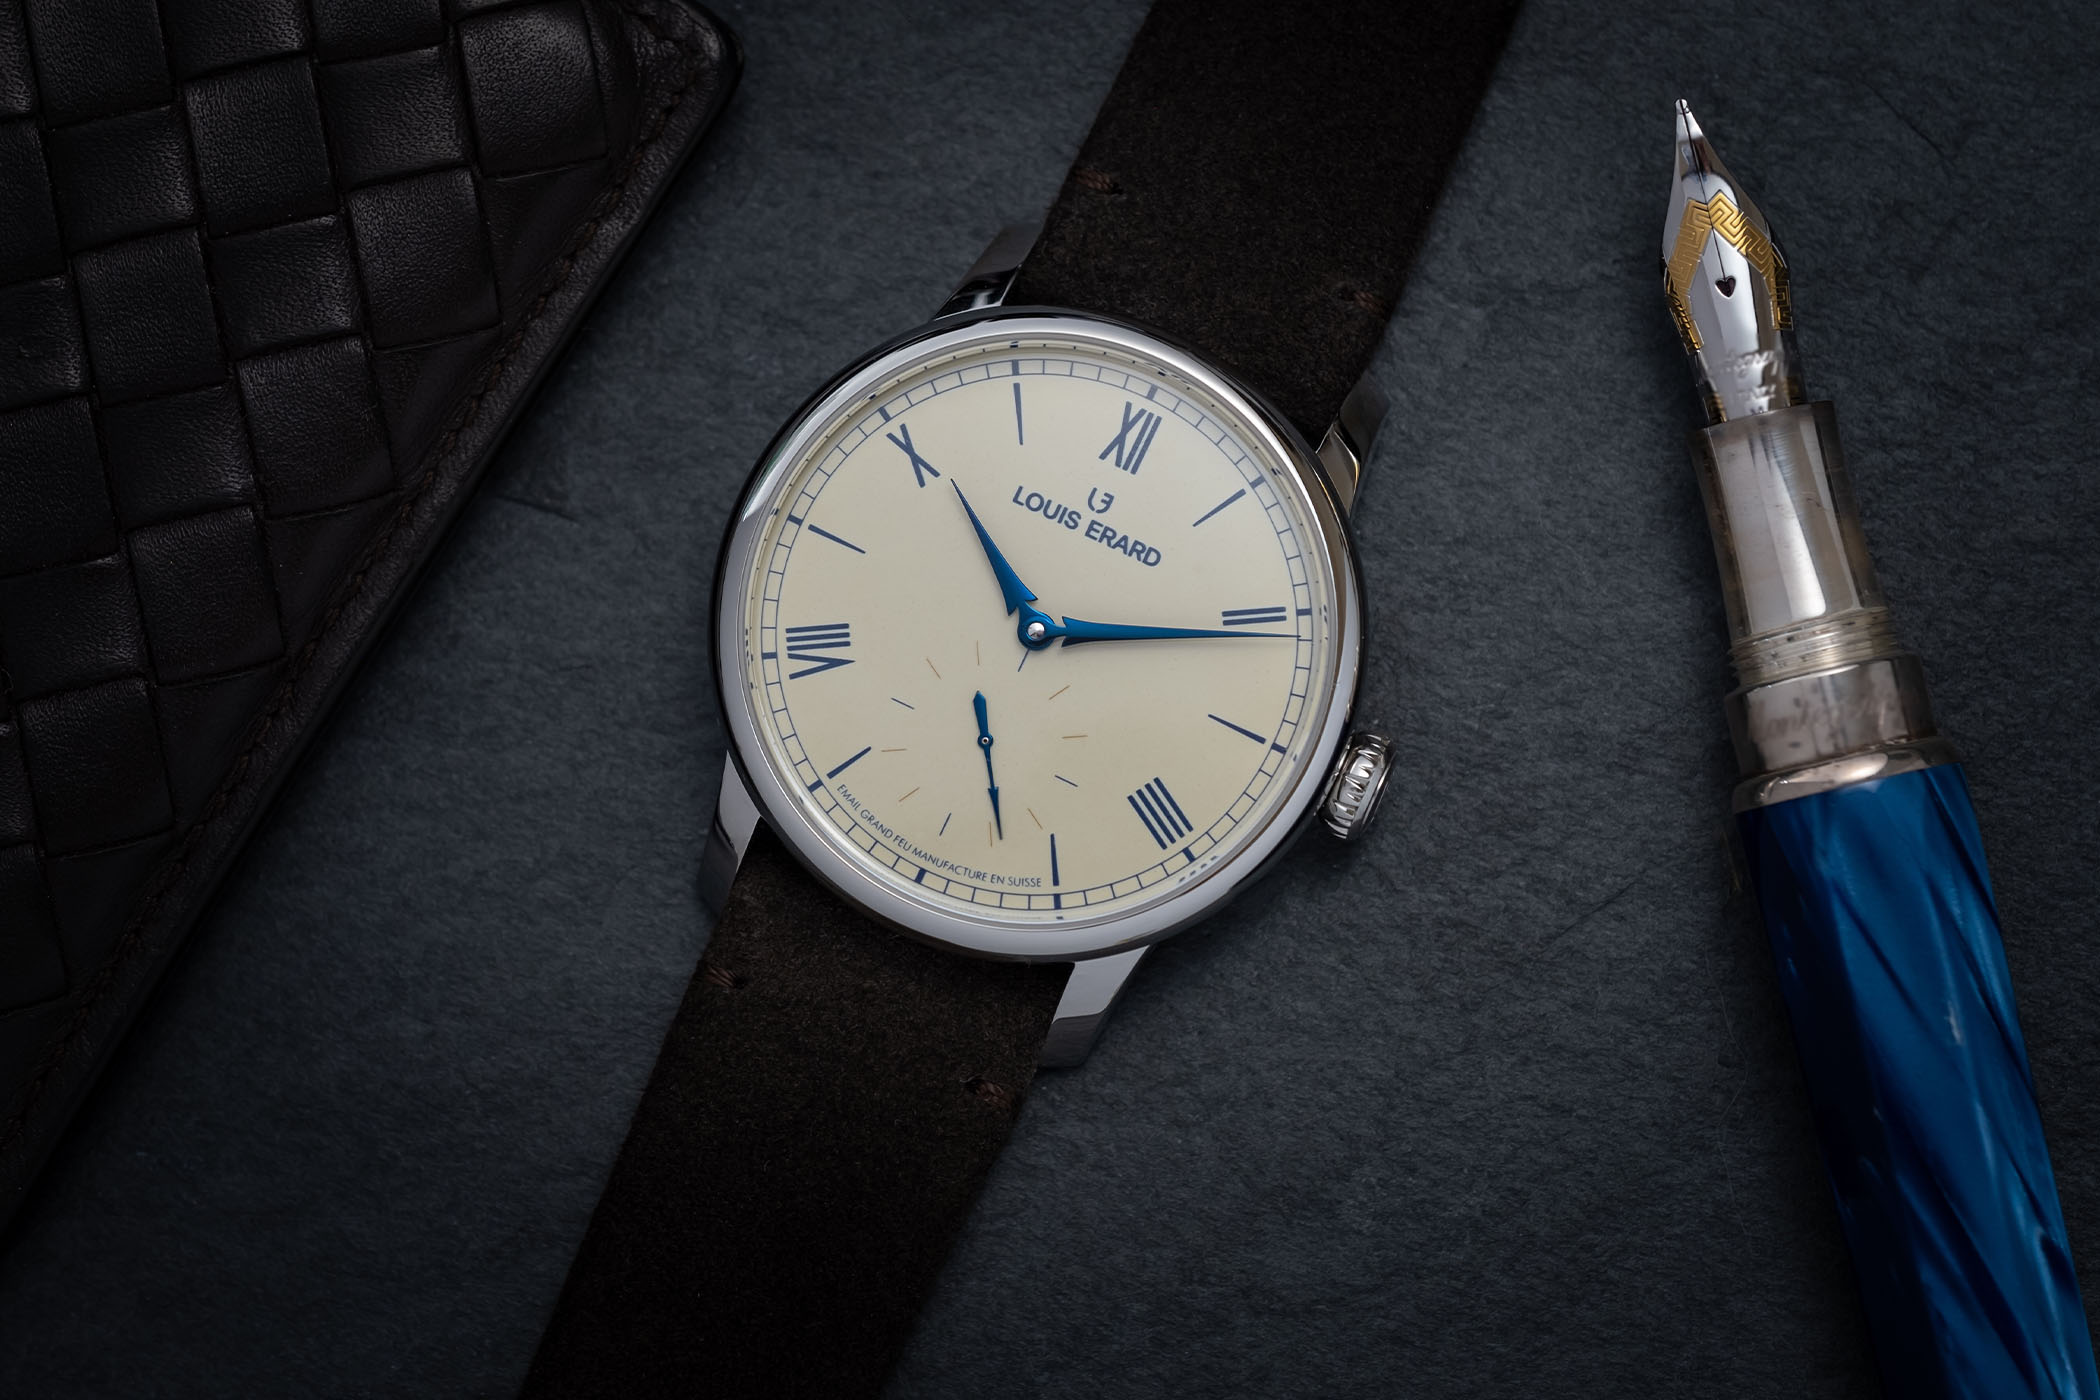 Introducing The Louis Erard Excellence Émail Grand Feu Small Seconds Watch